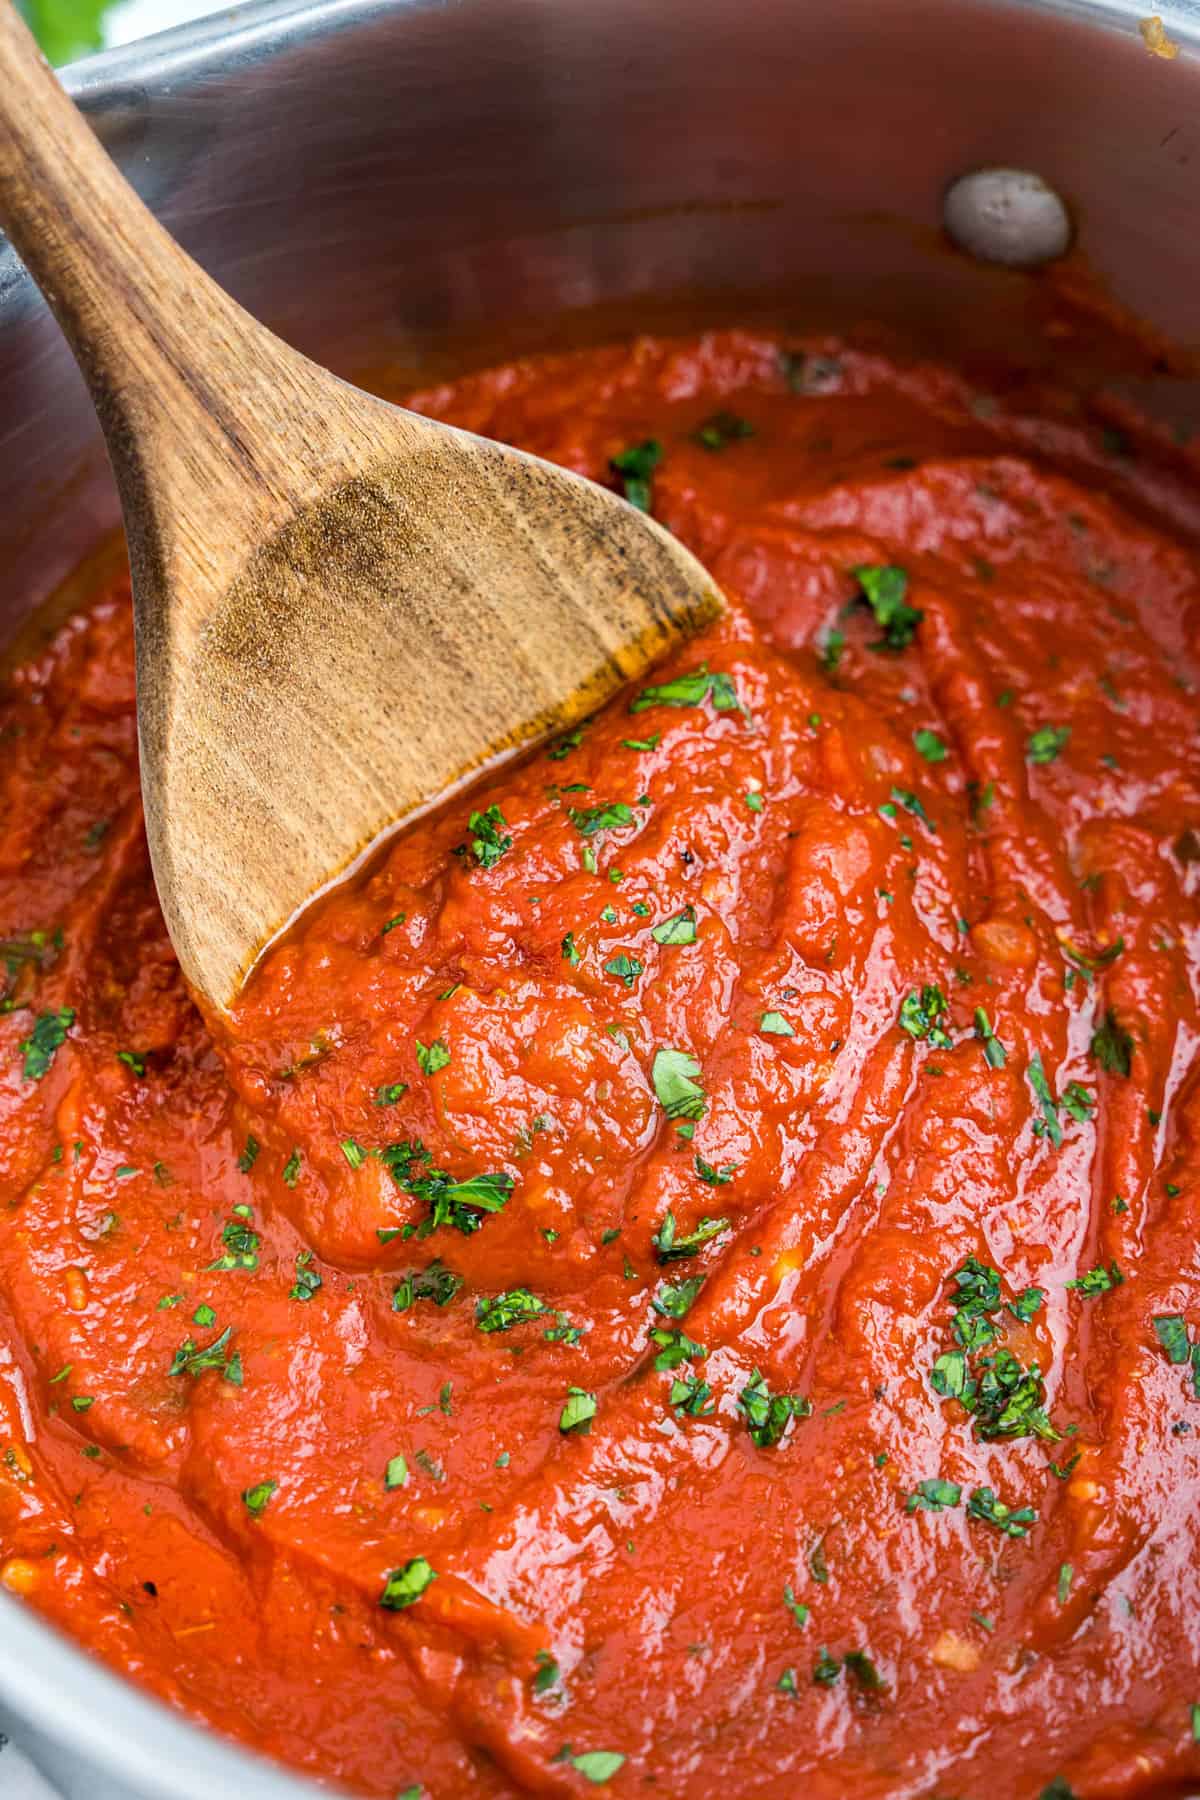 Best Marinara Sauce Recipe in Stovetop Pot Stirred with Wooden Spoon